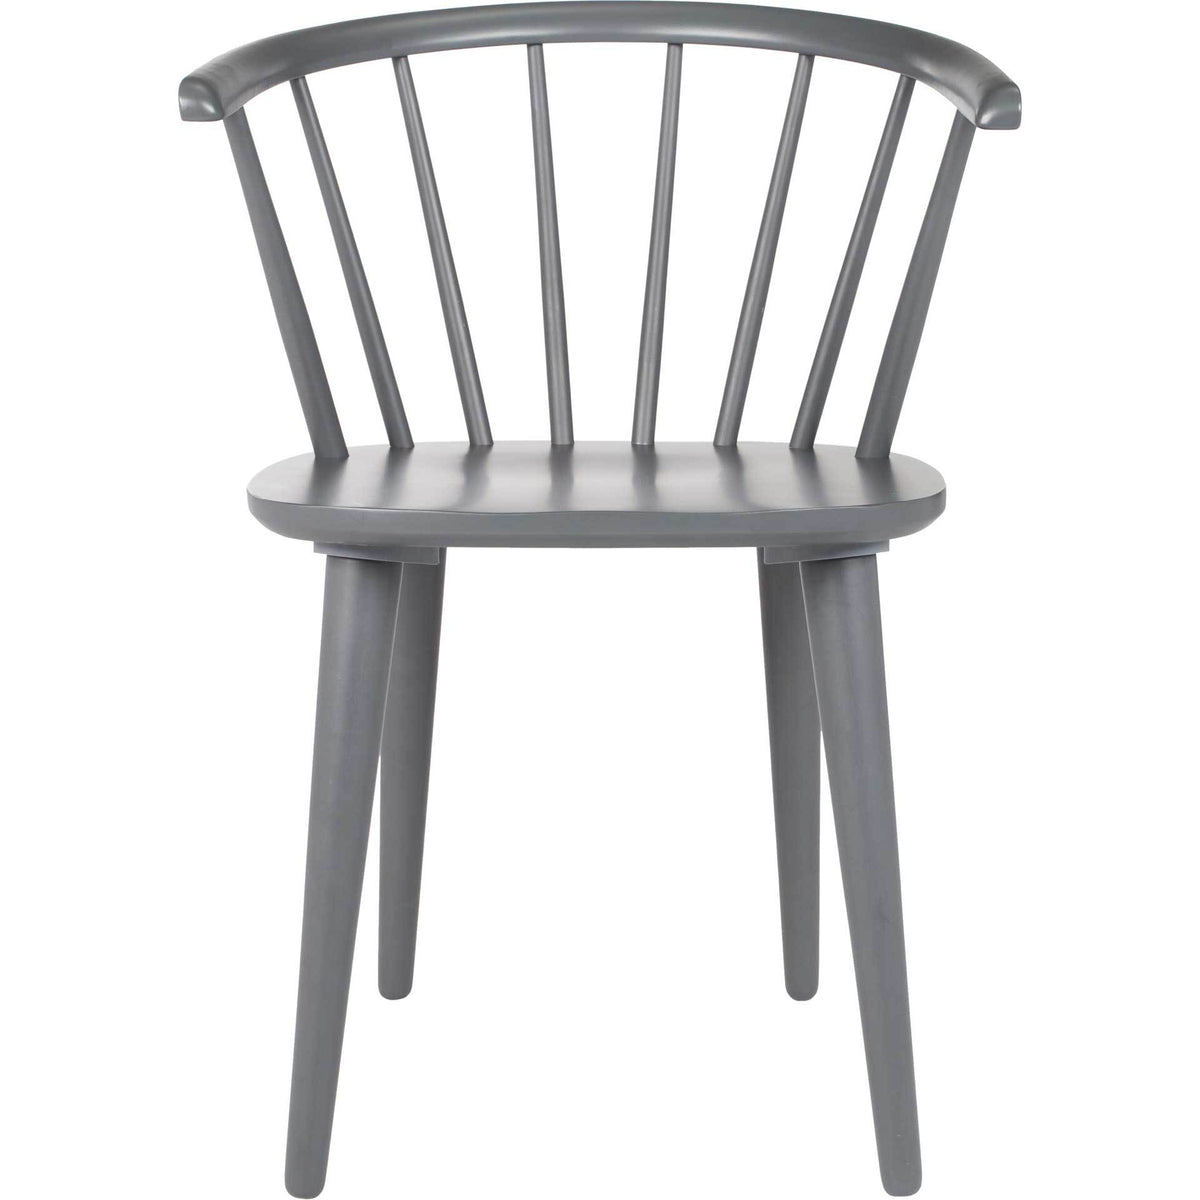 Blair Curved Spindle Side Chair Gray (Set of 2)